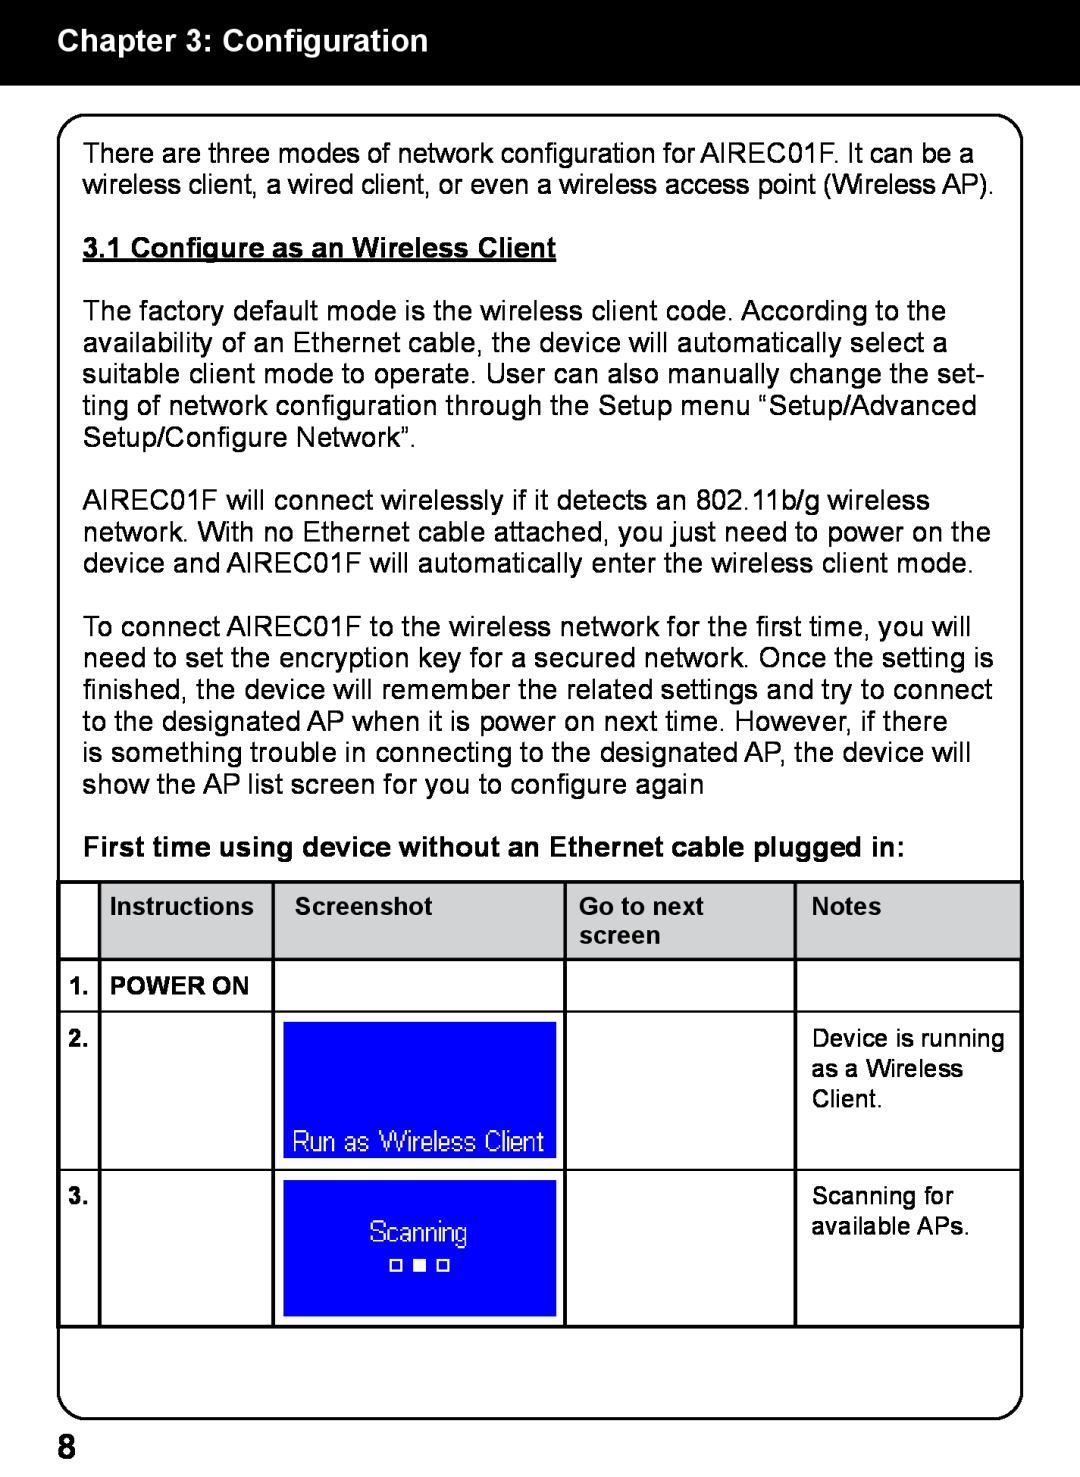 Aluratek AIREC01F manual Configuration, Configure as an Wireless Client 